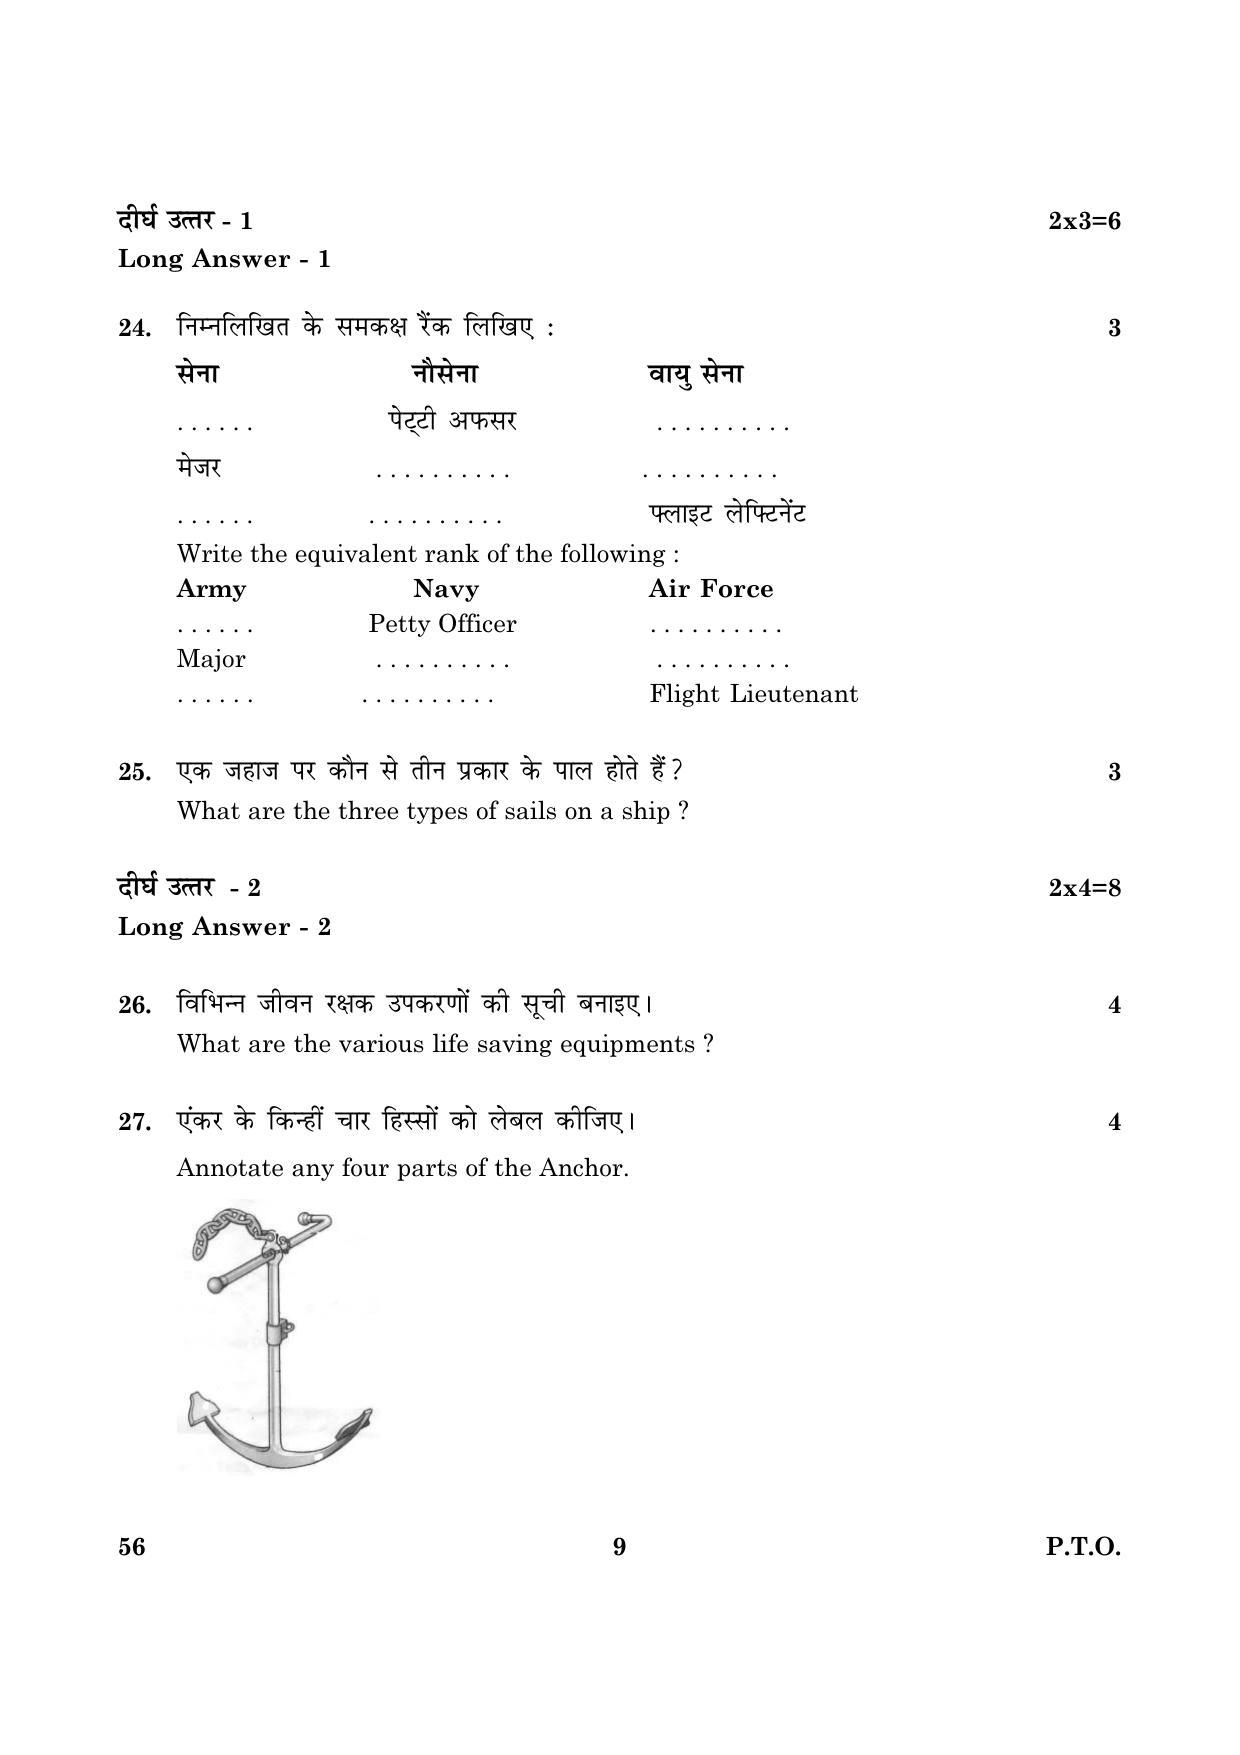 CBSE Class 10 056 National Cadet Corps 2016 Question Paper - Page 9